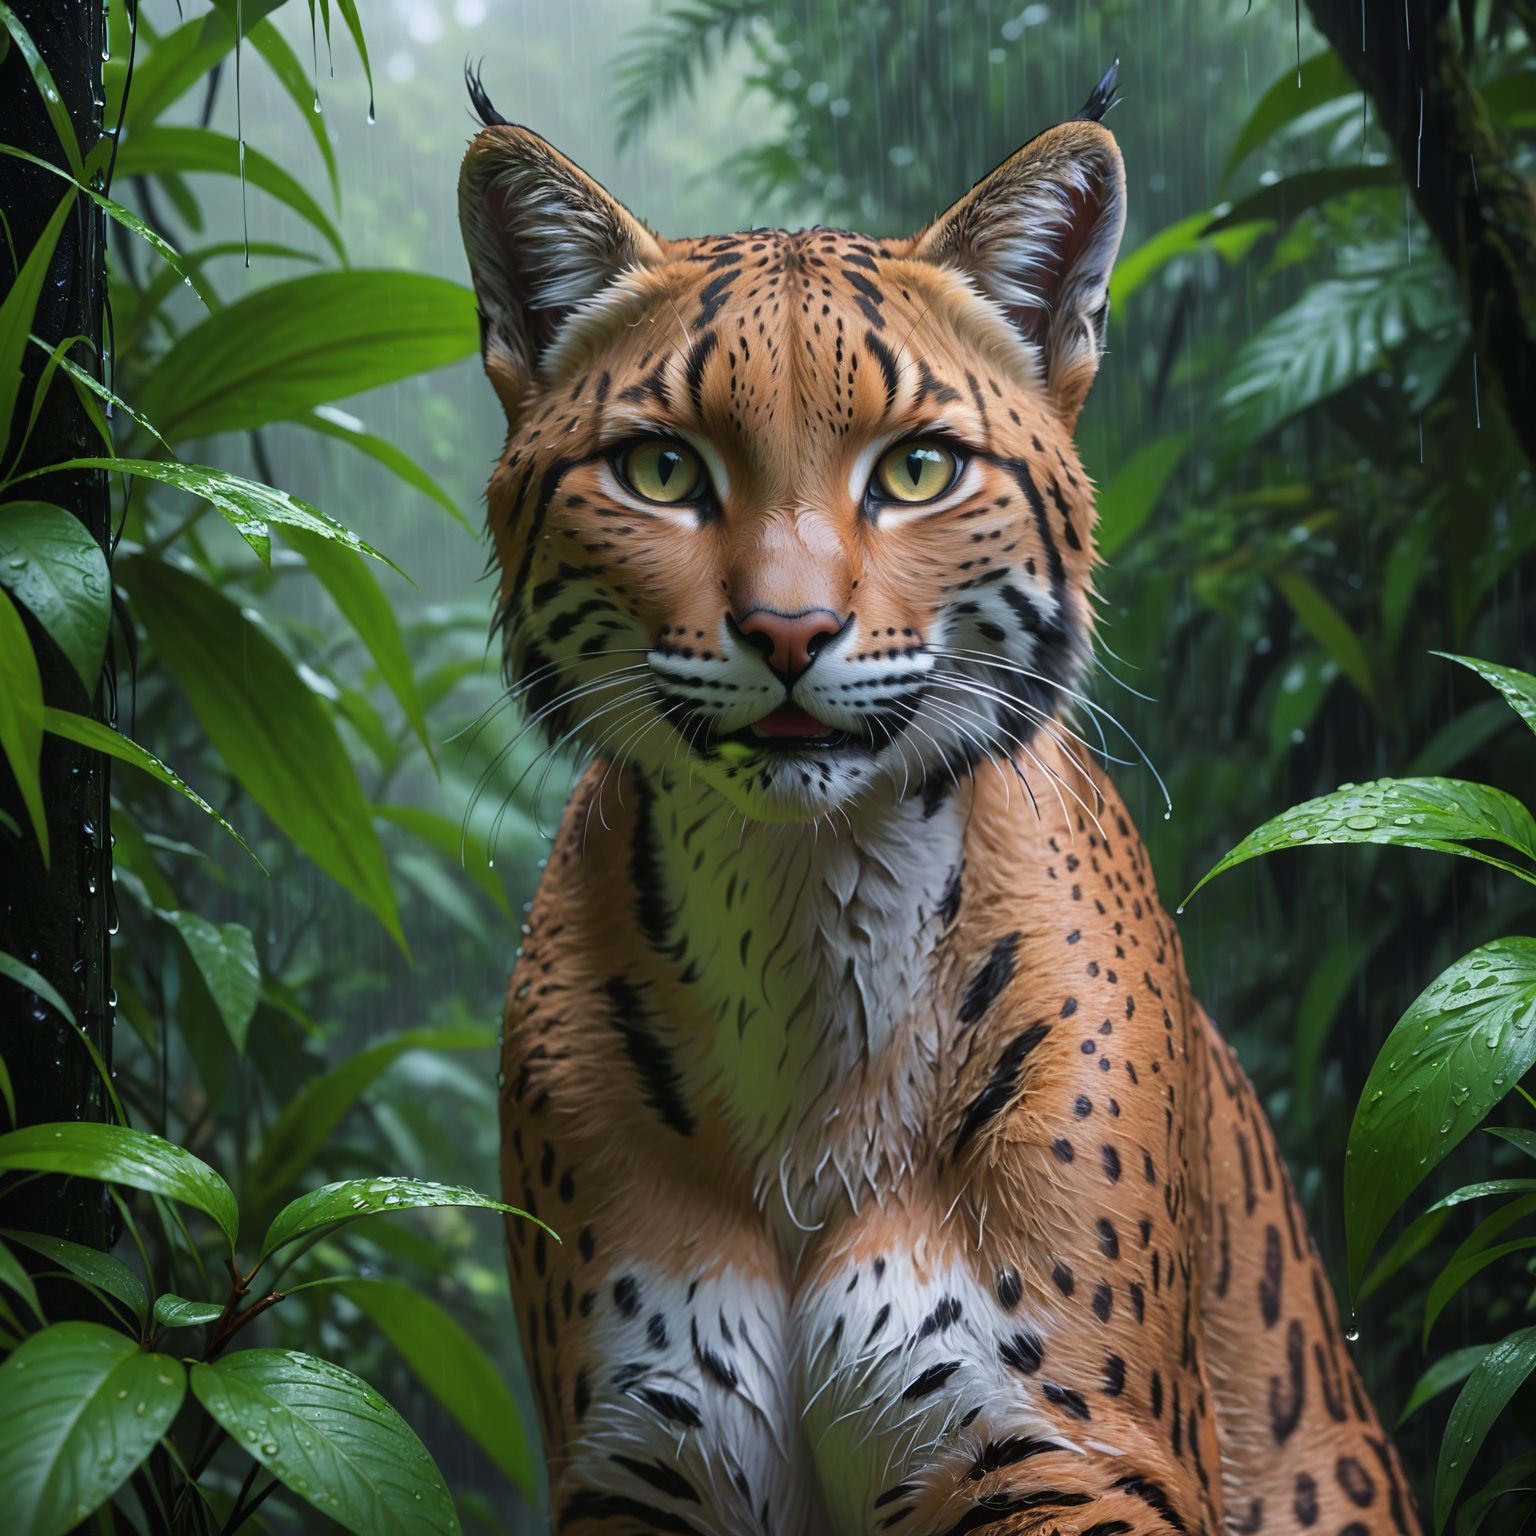 Hyperrealistic art portrait, Female linx, masterpiece, focus on face, outside, scenic, overgrown jungle, rain, wet . Extremely high-resolution details, photographic, realism pushed to extreme, fine texture, incredibly lifelike